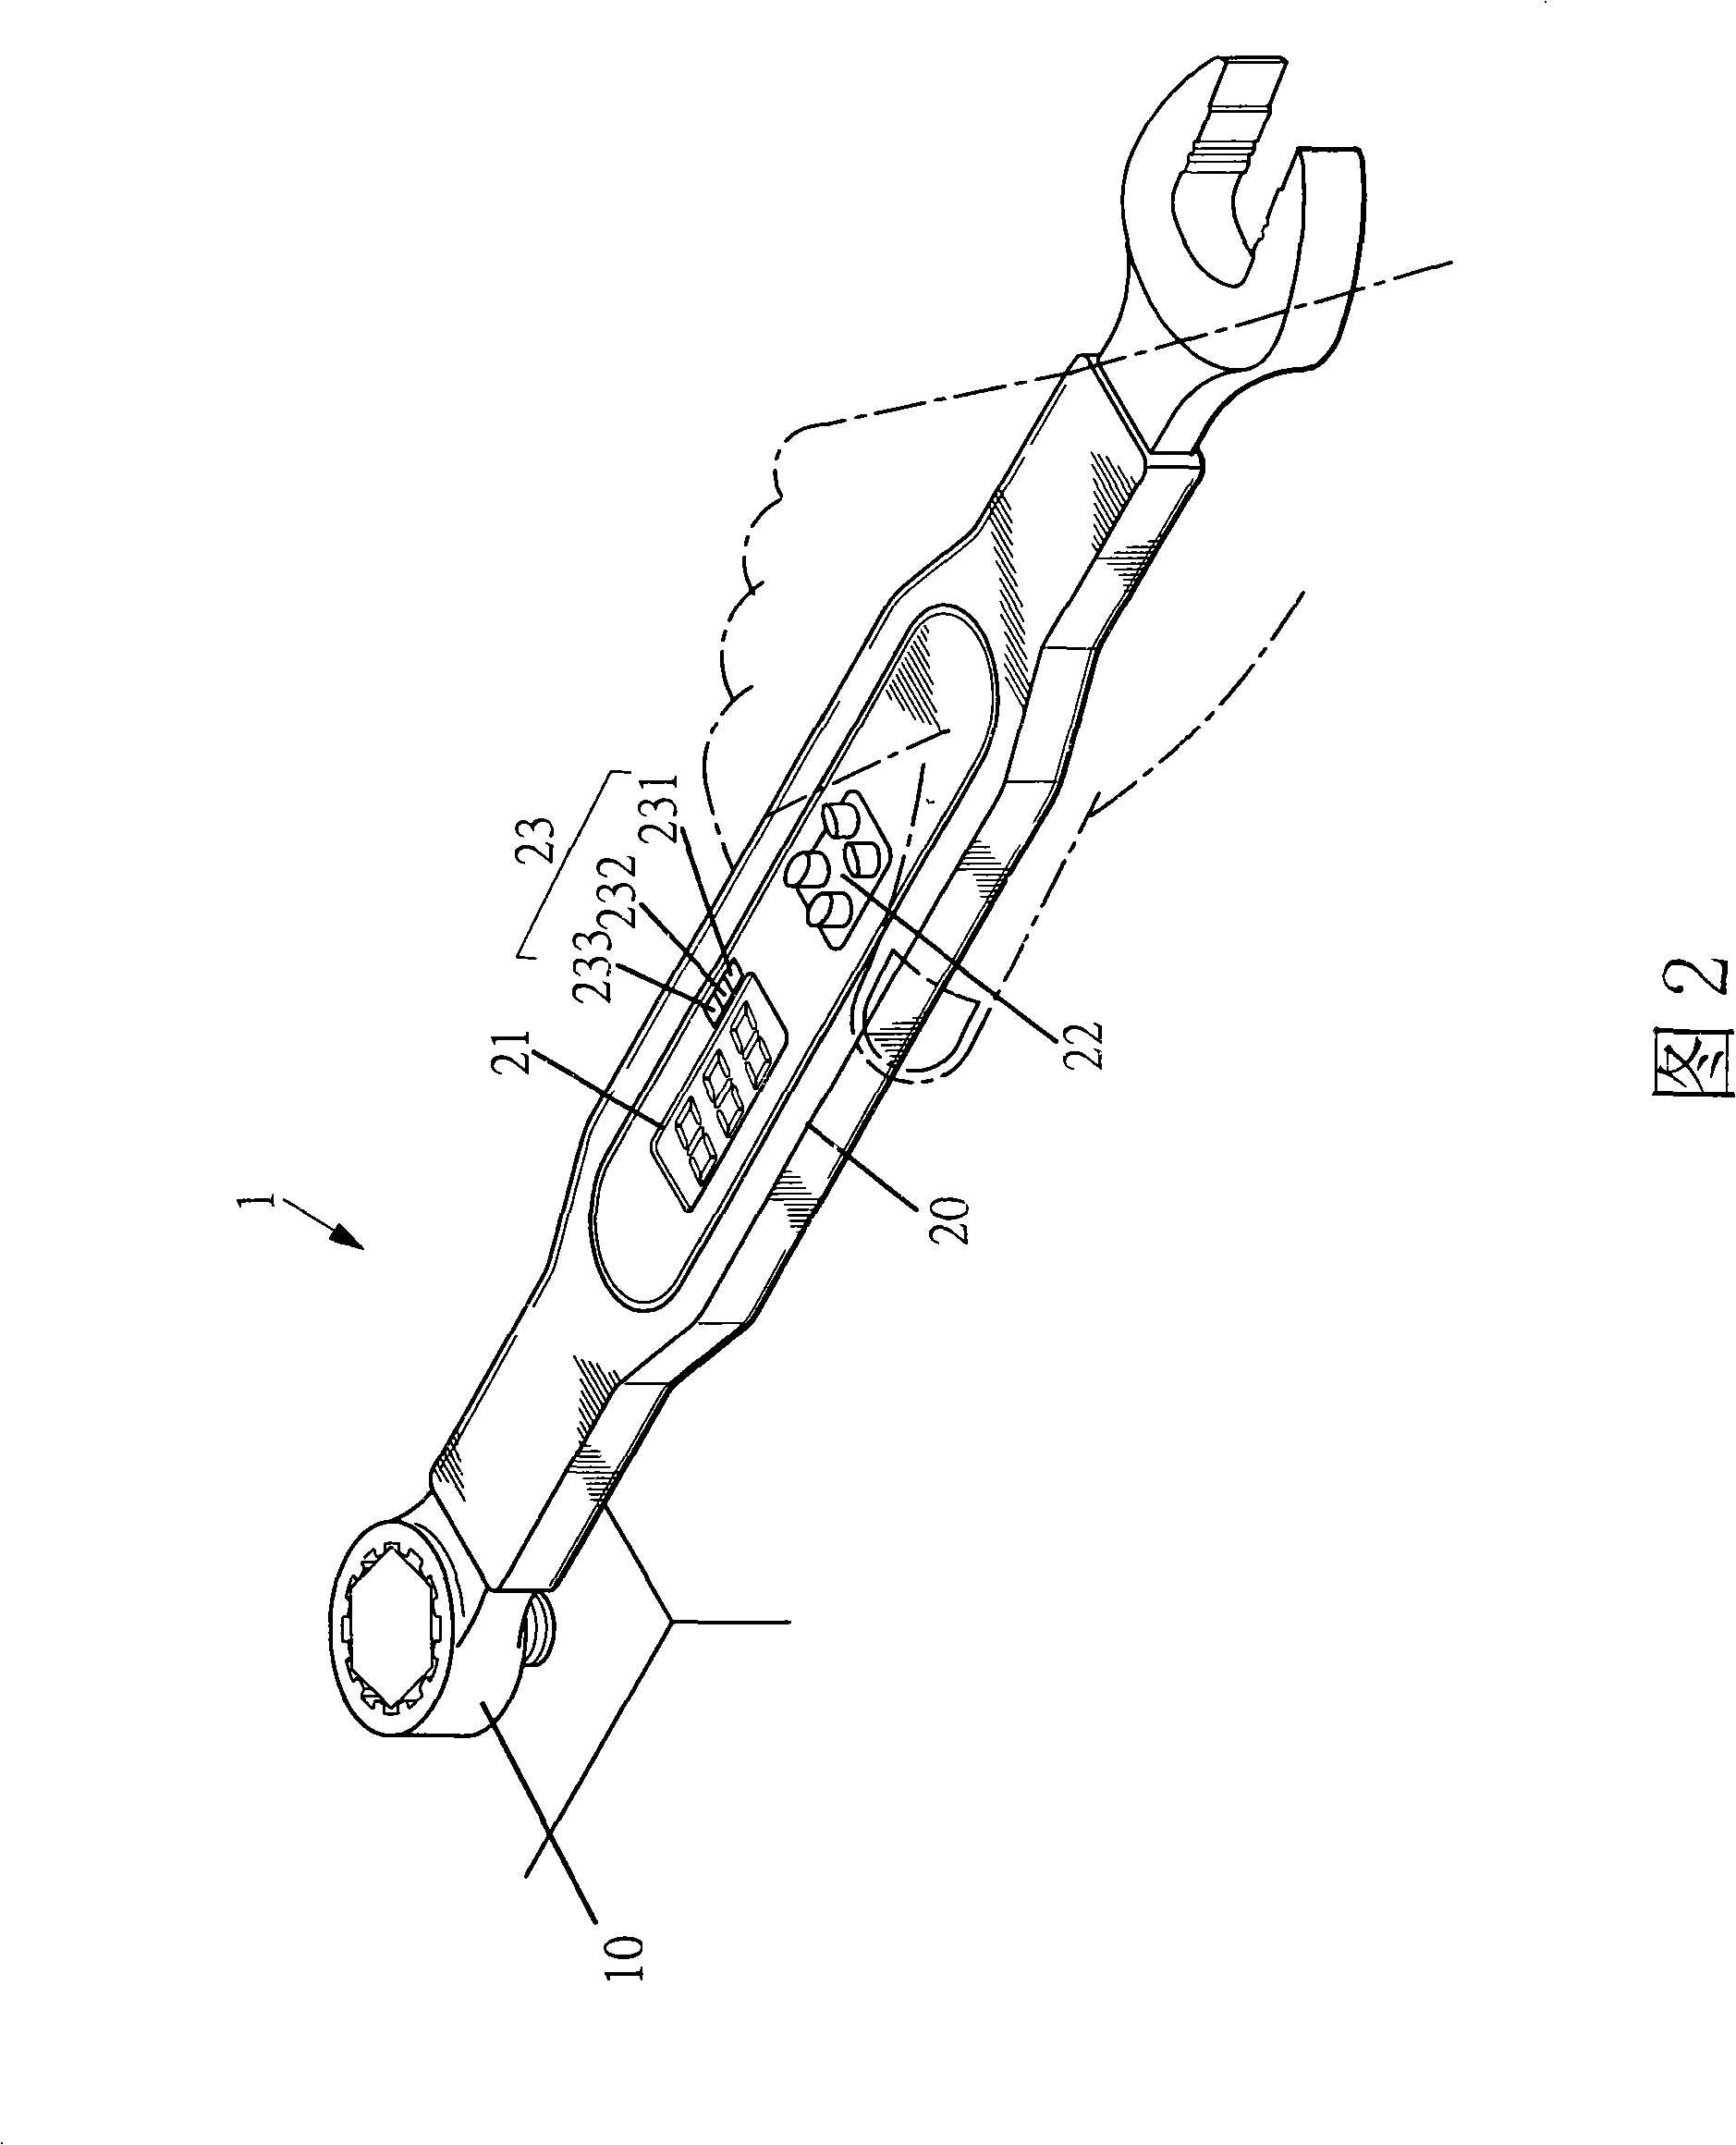 Wrench display setting device